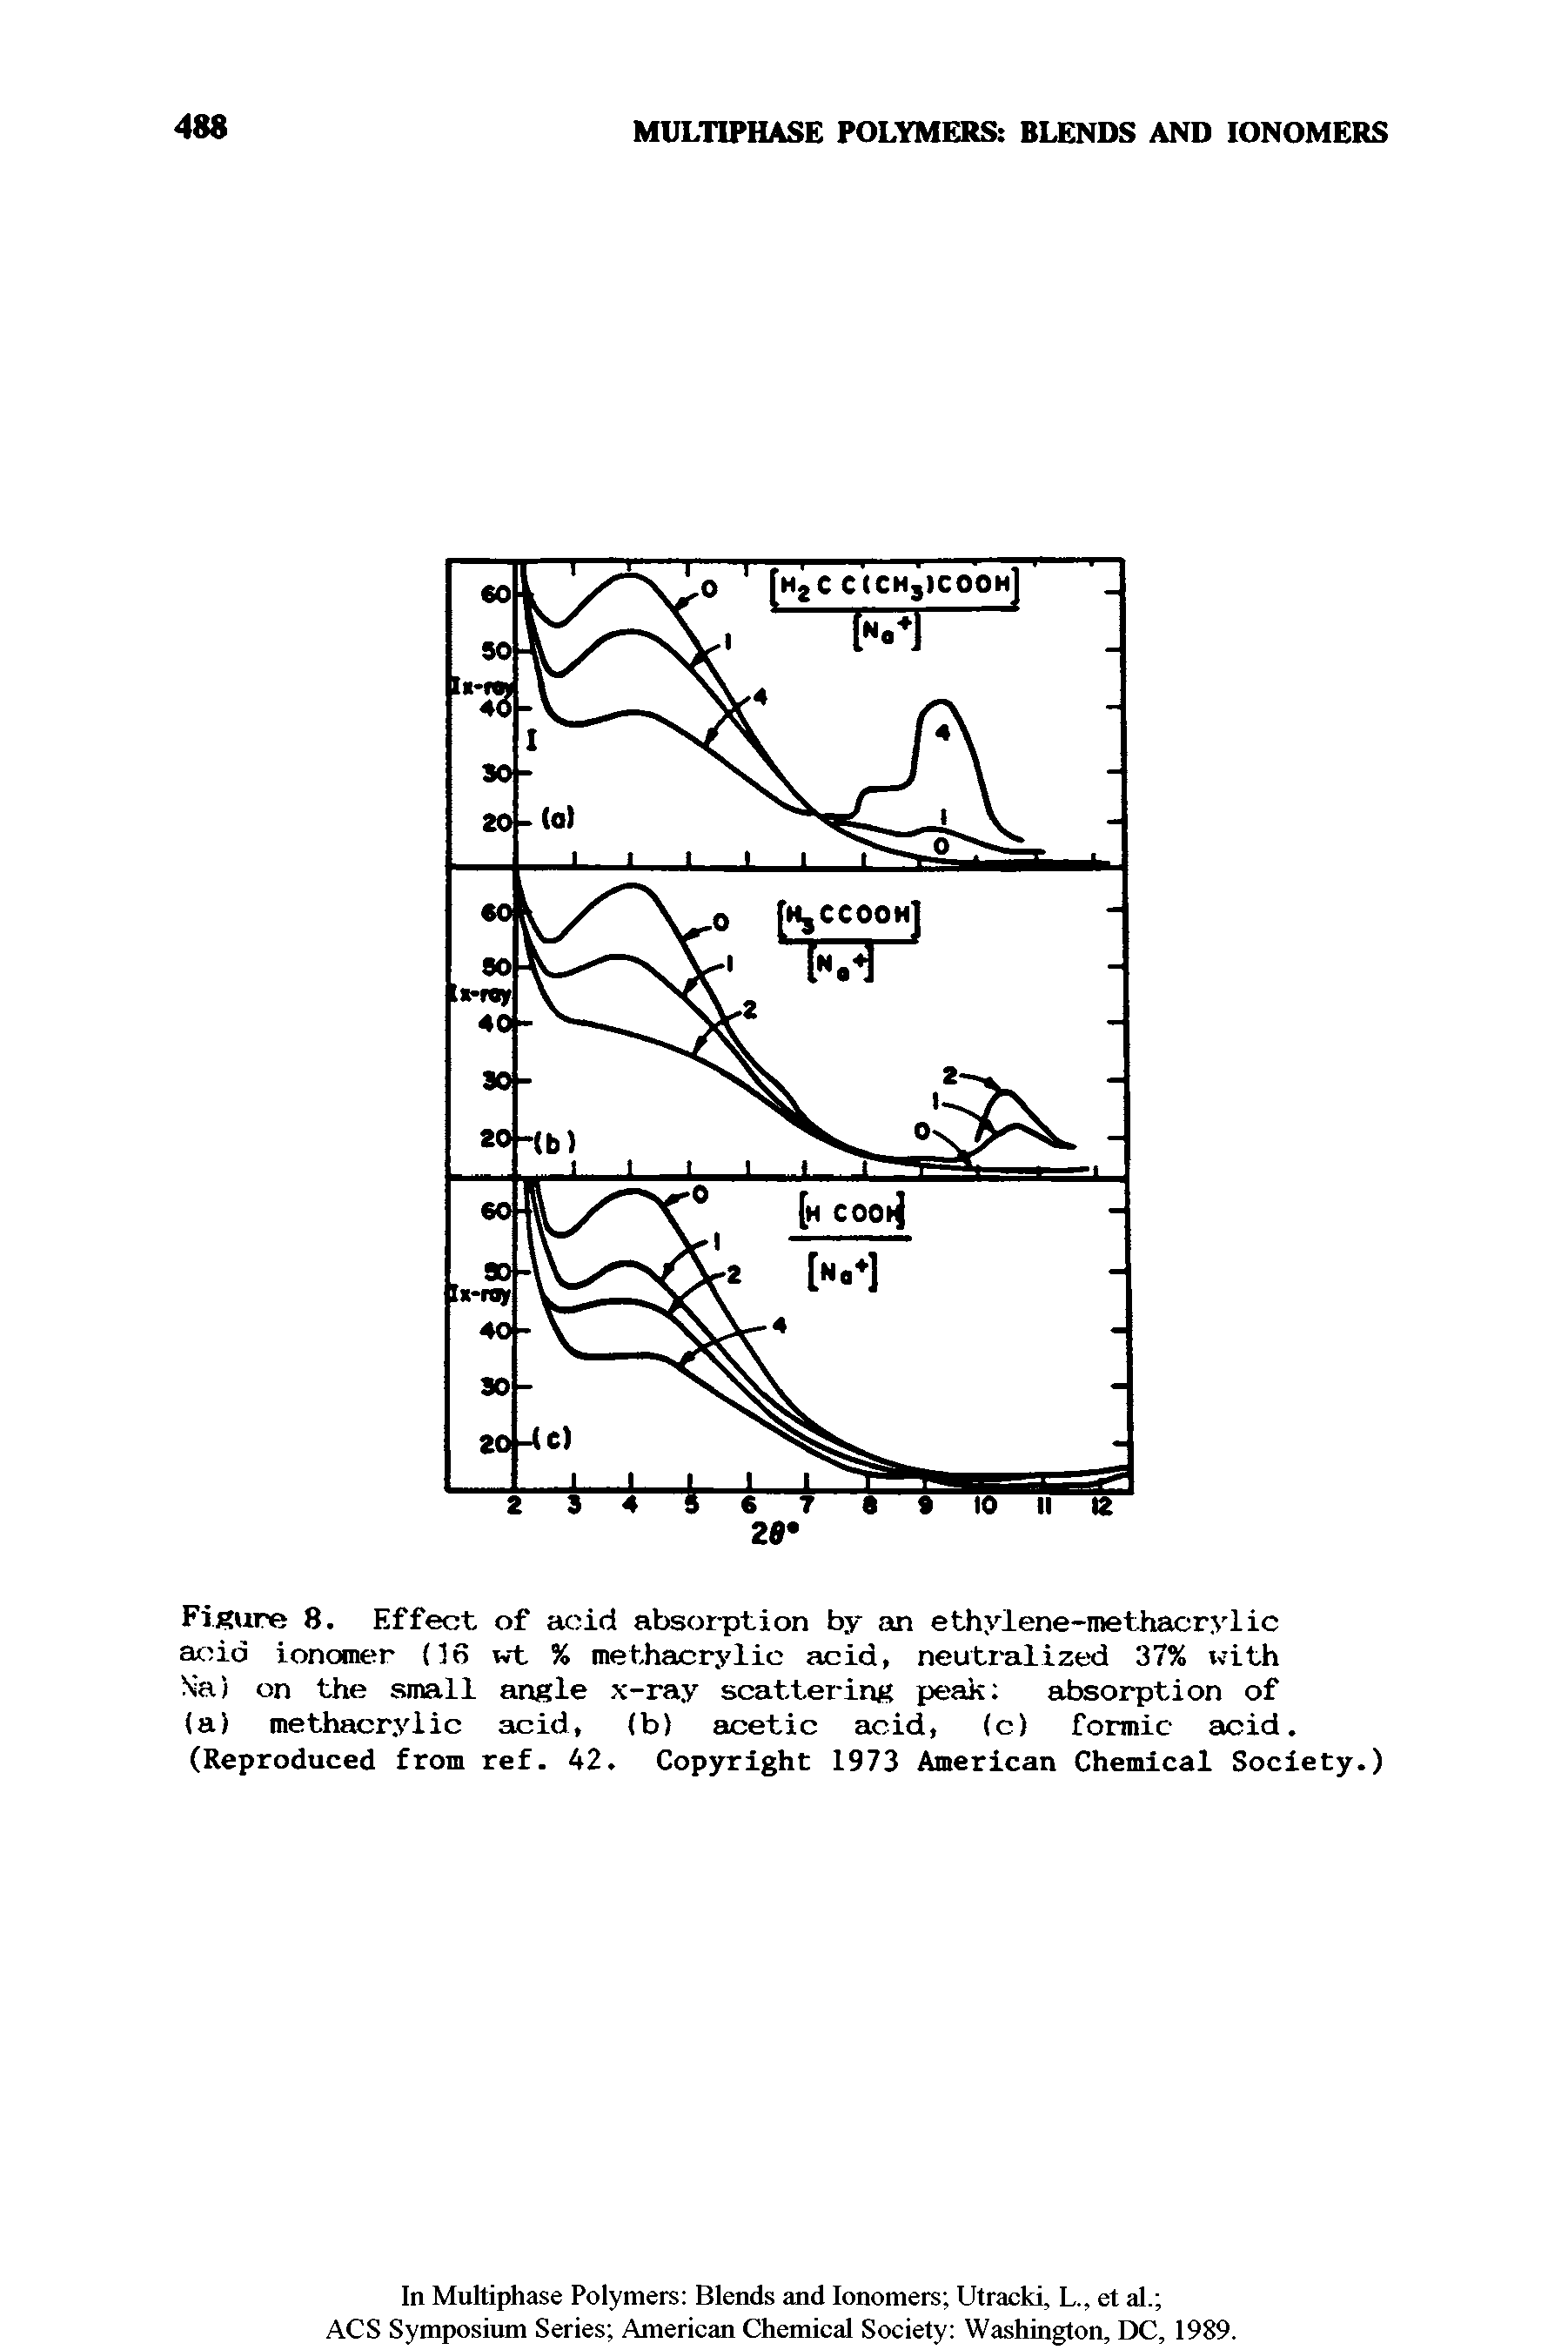 Figure 8. Effect of acid absor-ption by an ethylene-methacrylic acid ionomer (16 wt % methacrylic acid, neutralized 37% with a) on the small angle x-ray scattering peak absorption of (a) methacrylic acid, (b) acetic acid, (ci formic acid. (Reproduced from ref. 42. Copyright 1973 American Chemical Society.)...